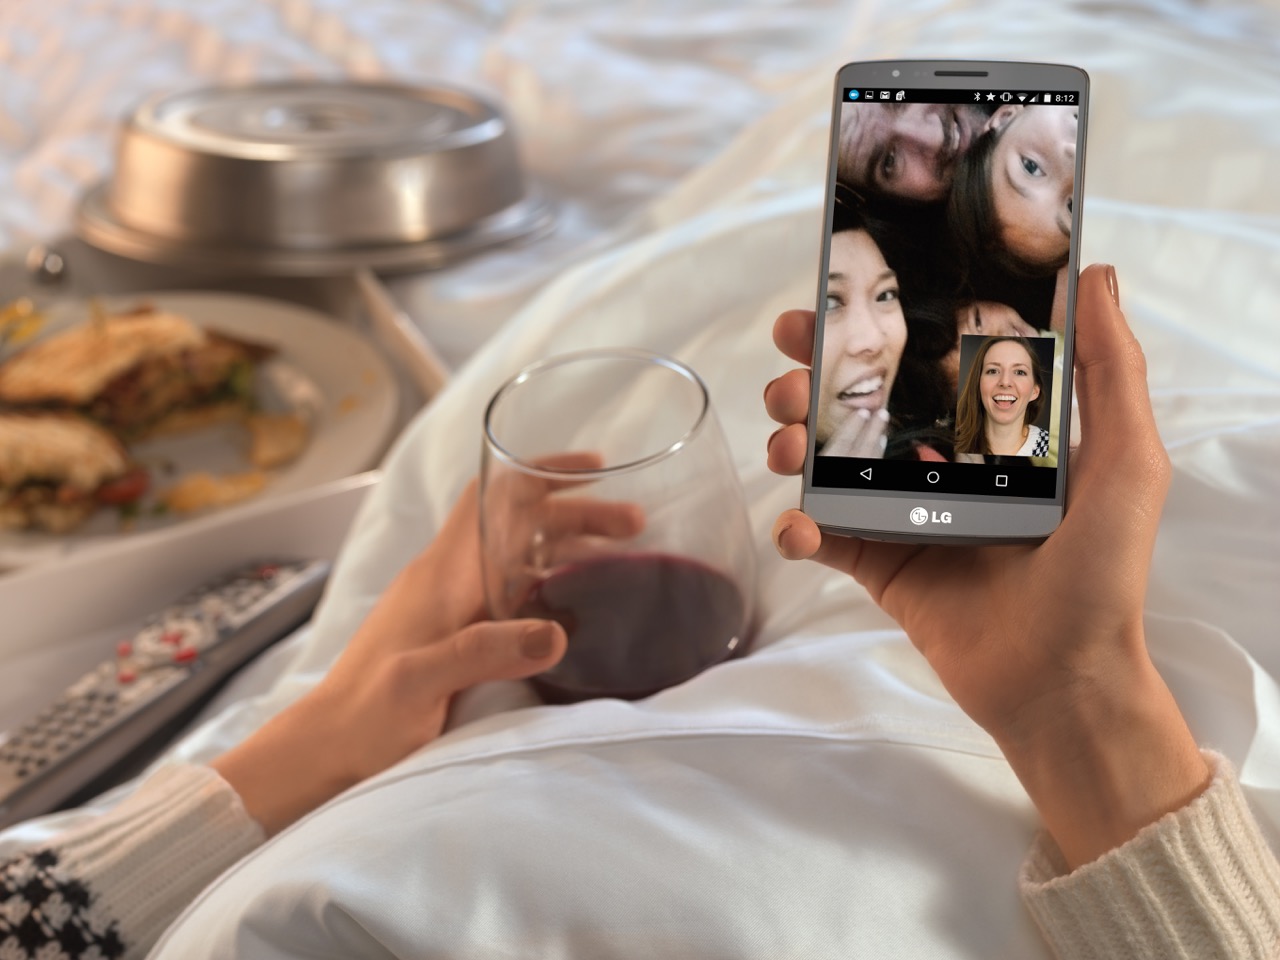 Cellphone and food in bed.   — Studio 3, Inc.